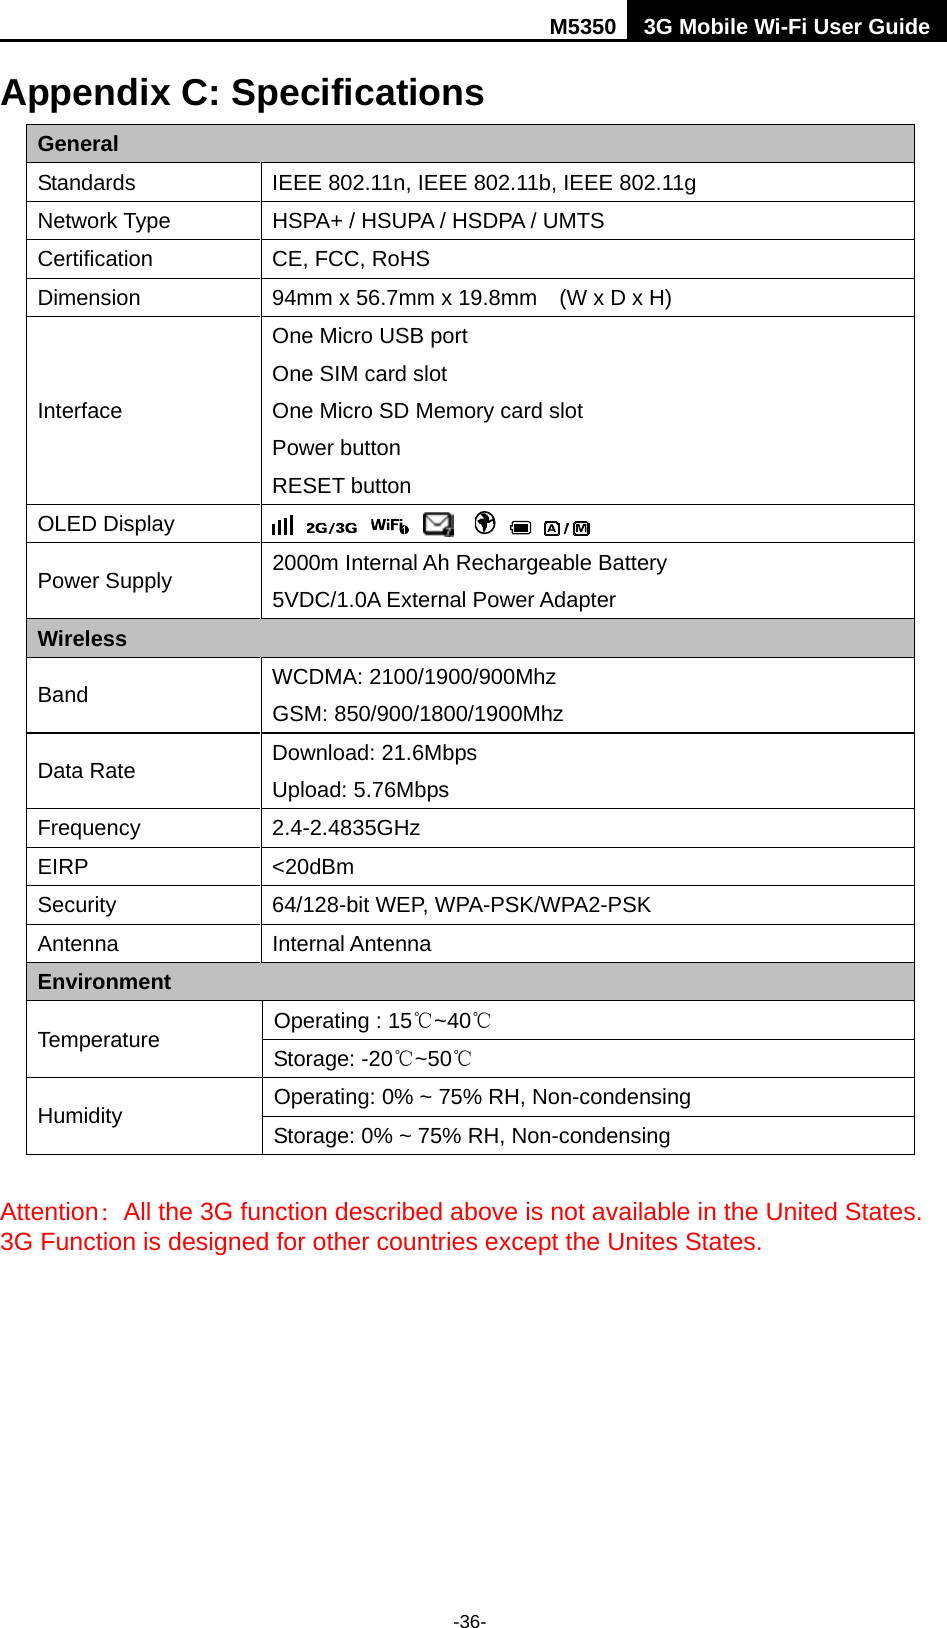 M53503G Mobile Wi-Fi User Guide-36- Appendix C: SpecificationsGeneralStandardsIEEE 802.11n, IEEE 802.11b, IEEE 802.11gNetwork Type HSPA+ / HSUPA / HSDPA / UMTSCertification CE, FCC, RoHSDimension 94mm x 56.7mm x 19.8mm (W x D x H)InterfaceOne Micro USB portOne SIM card slotOne Micro SD Memory card slotPower buttonRESET buttonOLED DisplayPower Supply 2000m Internal Ah Rechargeable Battery5VDC/1.0A External Power AdapterWirelessBandWCDMA: 2100/1900/900Mhz                                                       GSM: 850/900/1800/1900MhzData Rate Download: 21.6MbpsUpload: 5.76MbpsFrequency 2.4-2.4835GHzEIRP &lt;20dBmSecurity 64/128-bit WEP, WPA-PSK/WPA2-PSKAntenna  Internal AntennaEnvironmentTemperatureOperating : 15℃~40℃Storage: -20℃~50℃Humidity Operating: 0% ~ 75% RH, Non-condensingStorage: 0% ~ 75% RH, Non-condensingAttention：All the 3G function described above is not available in the United States. 3G Function is designed for other countries except the Unites States.